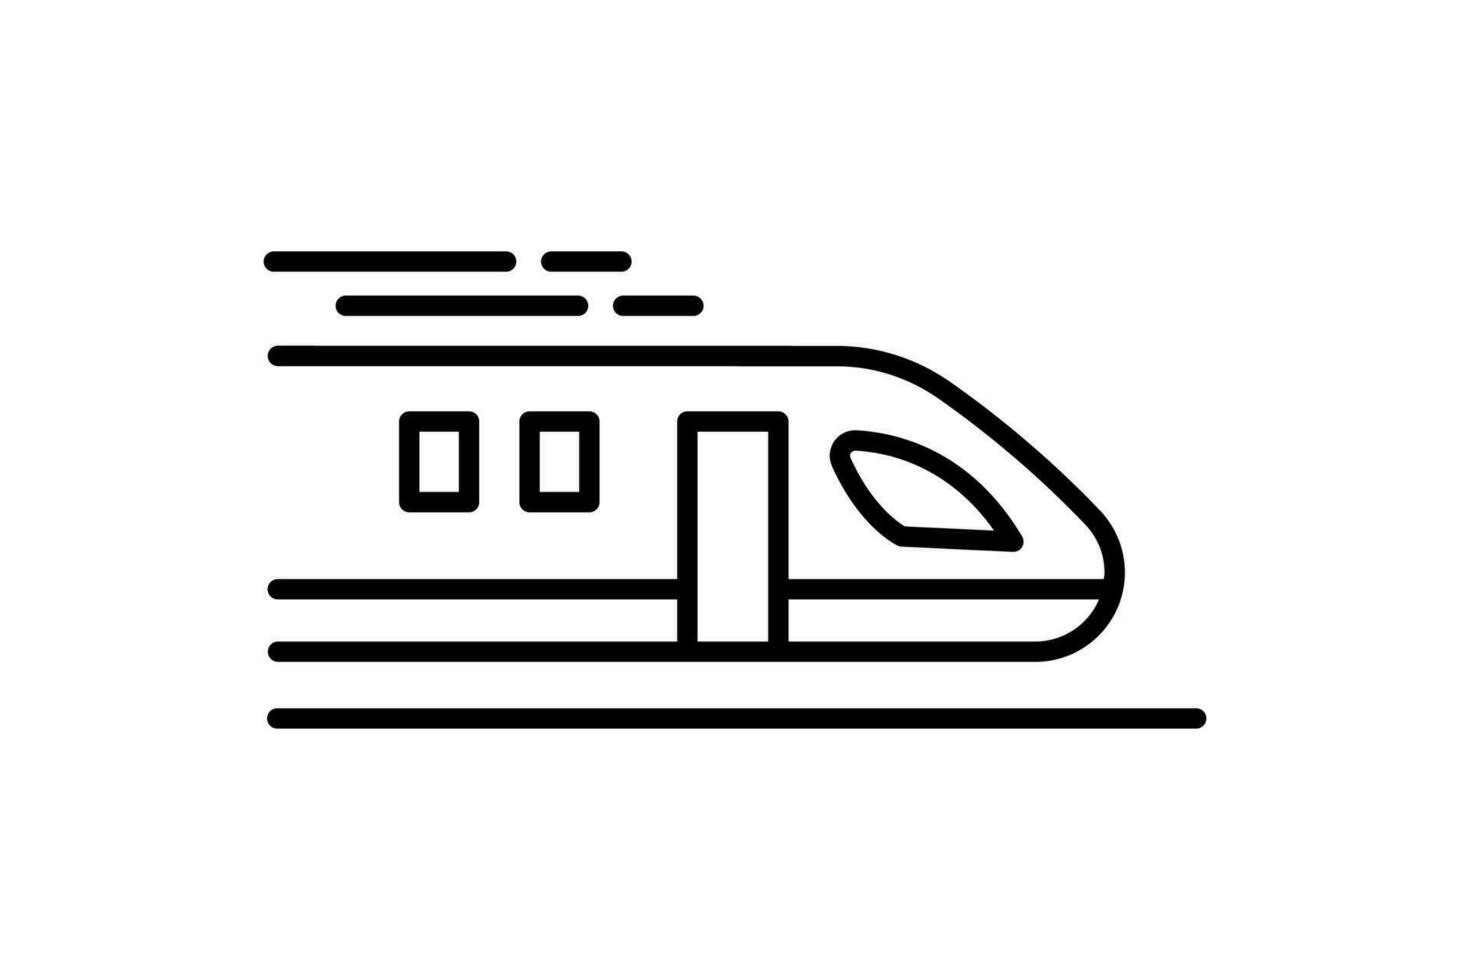 bullet train icon. icon related to speed, transportation. suitable for web site, app, user interfaces, printable etc. Line icon style. Simple vector design editable